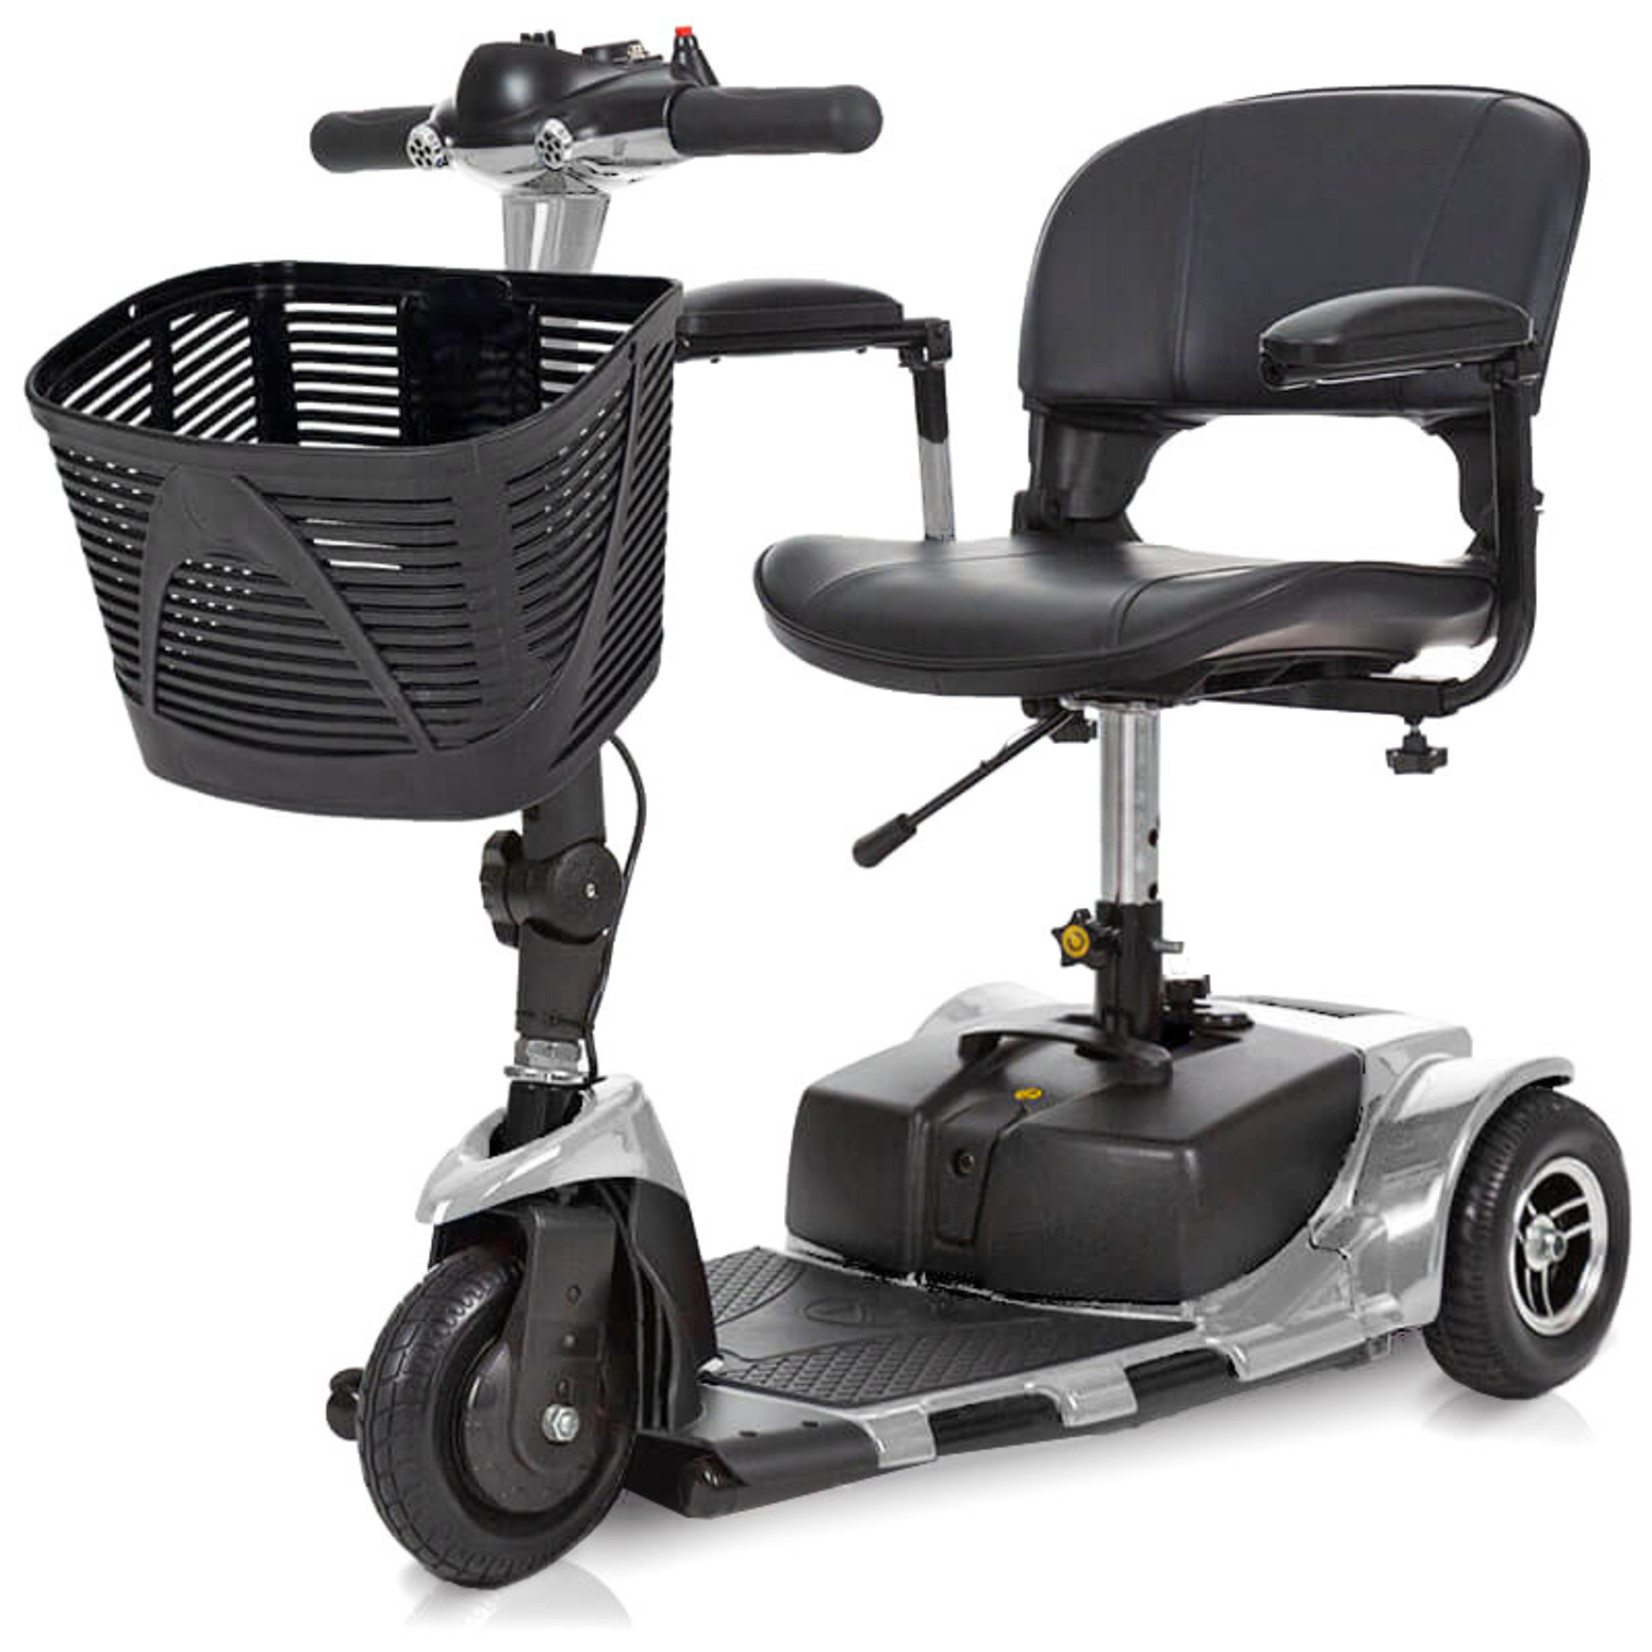 Vive Health 3 Wheel Mobility Scooter